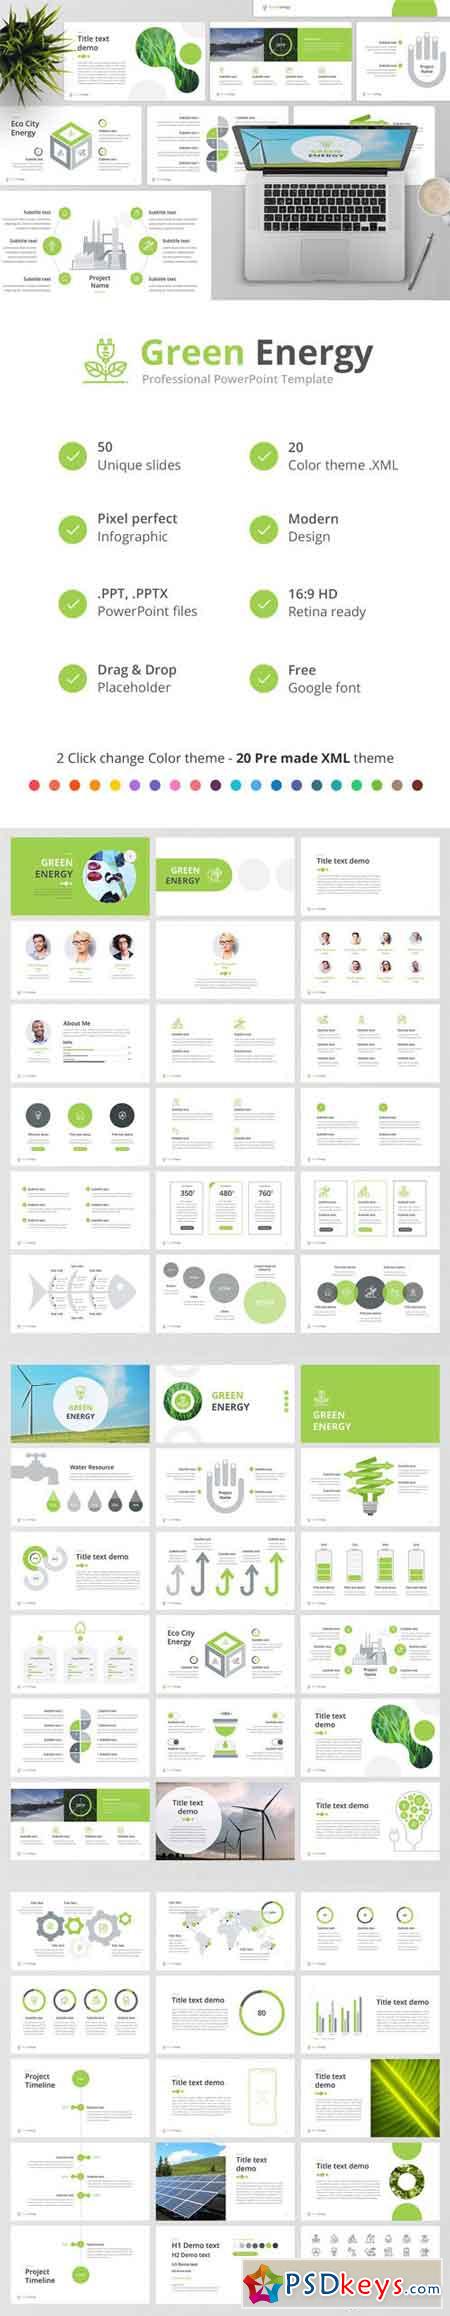 green-energy-powerpoint-template-free-download-photoshop-vector-stock